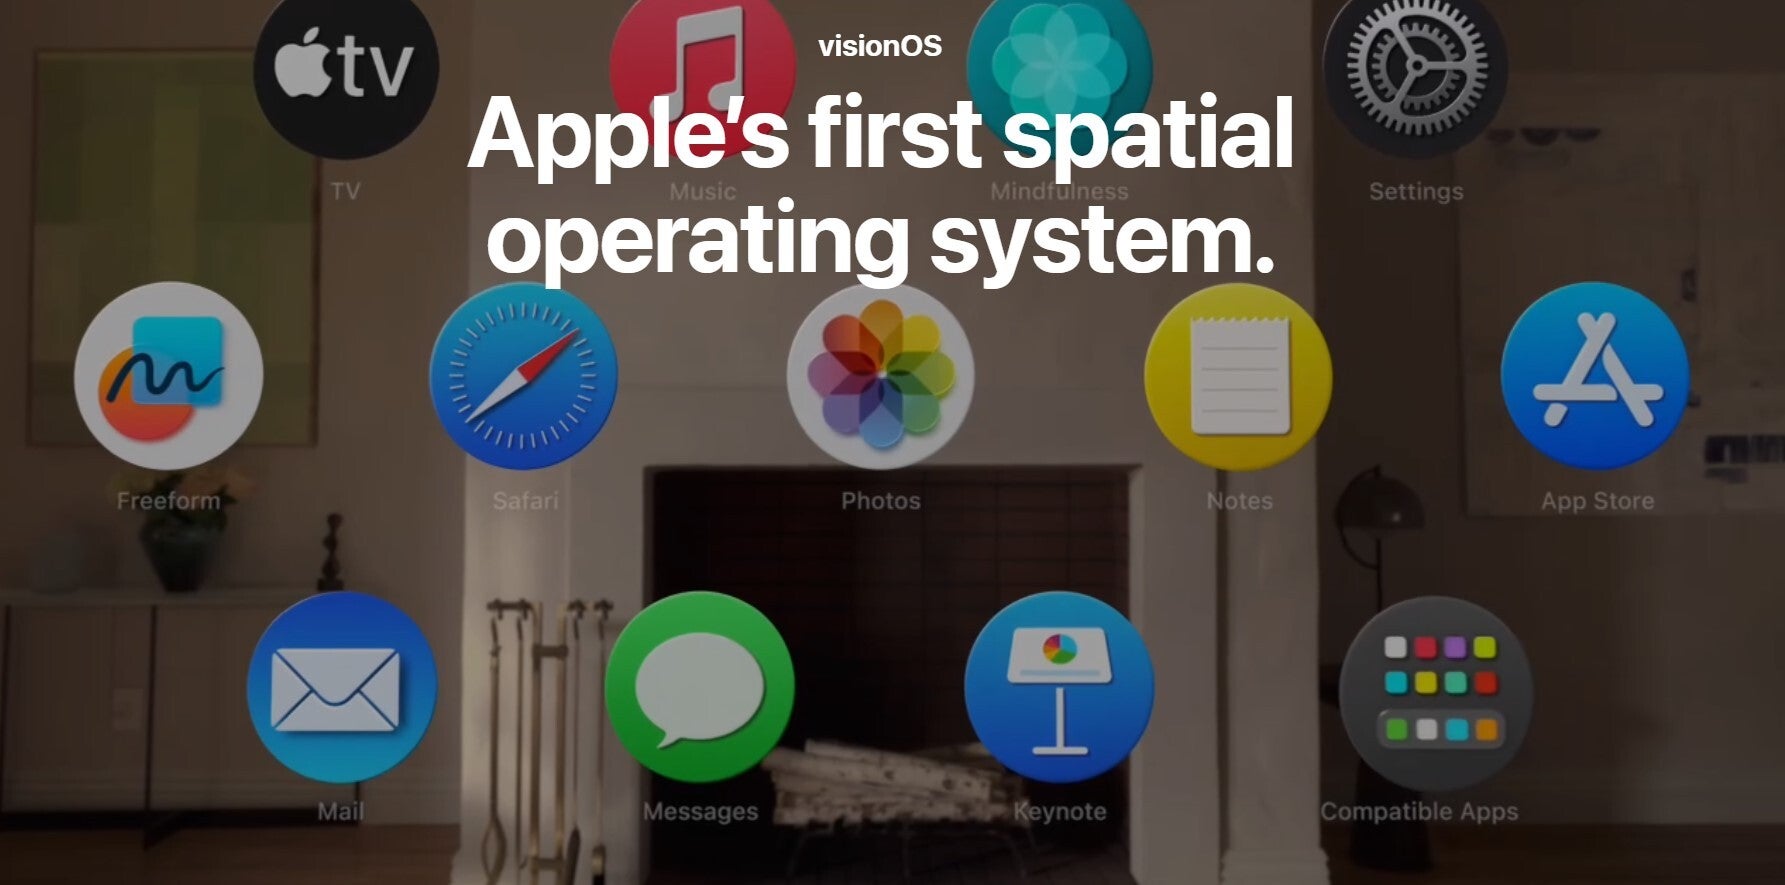 The number of visionOS-compatible apps for the Apple Vision Pro may disappoint at launch - Google, Netflix, and Spotify gang up on Apple Vision Pro to keep it niche, but why?